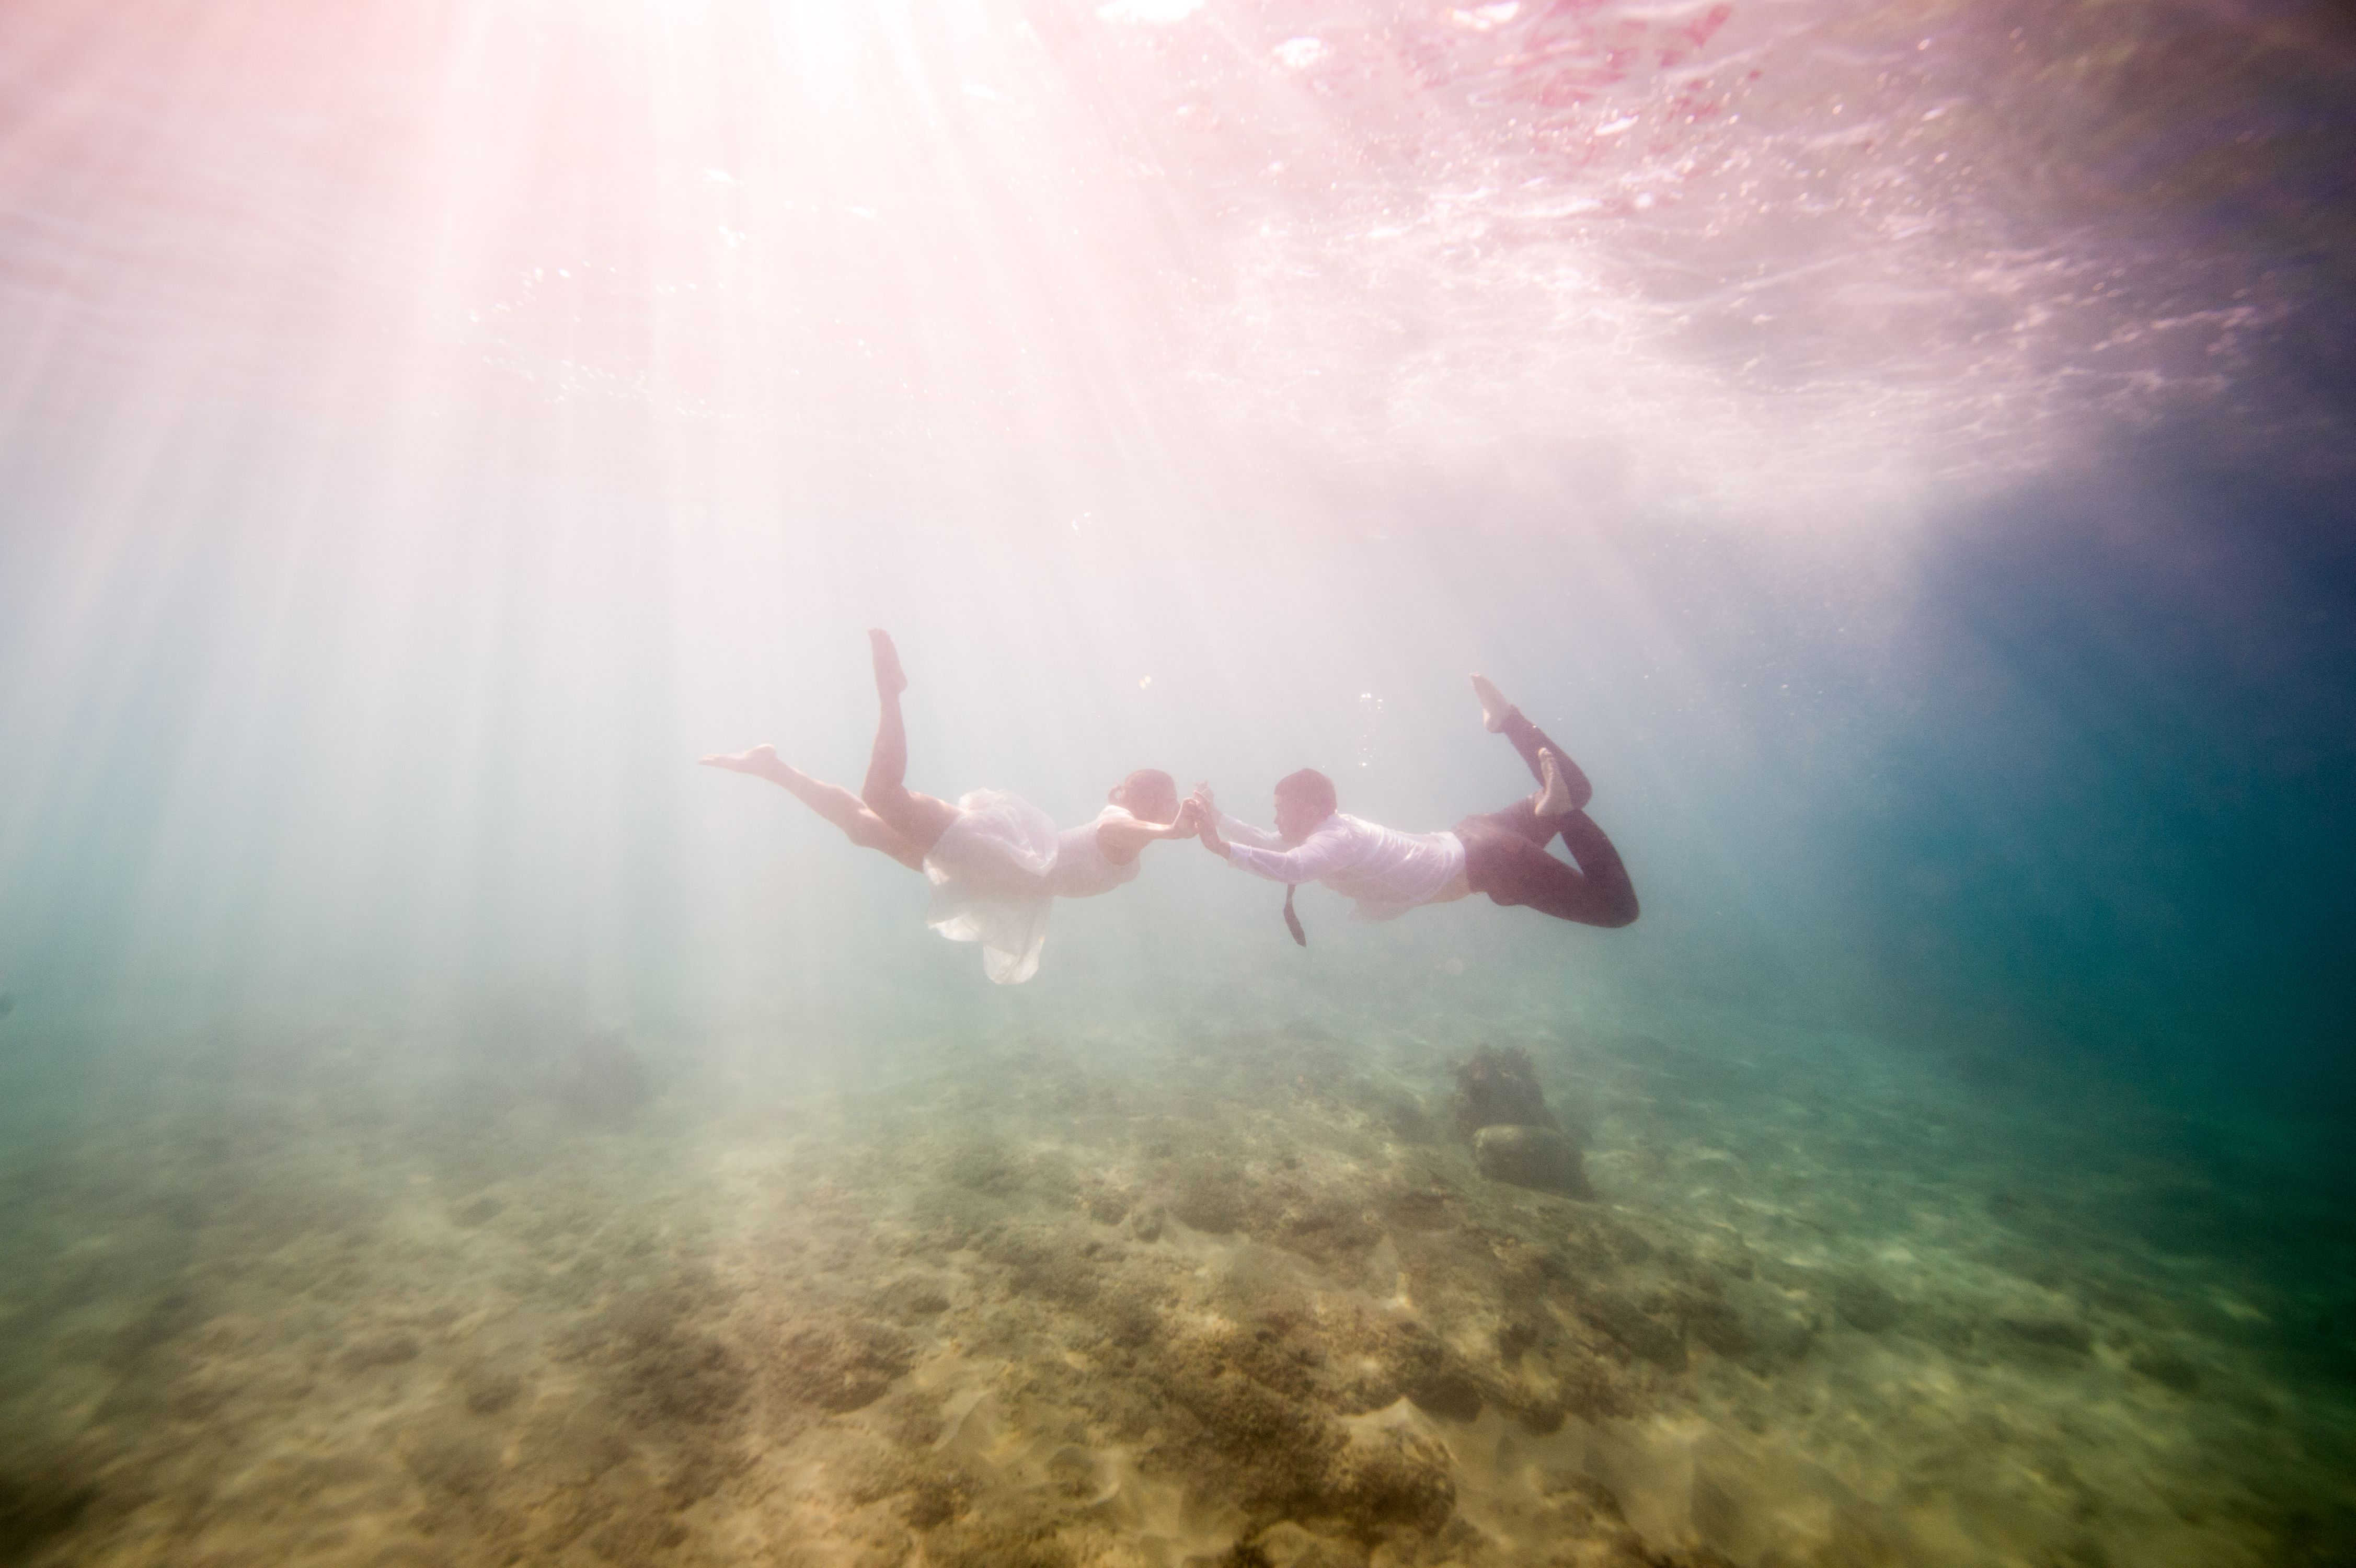 Underwater wedding photo with light beams from above